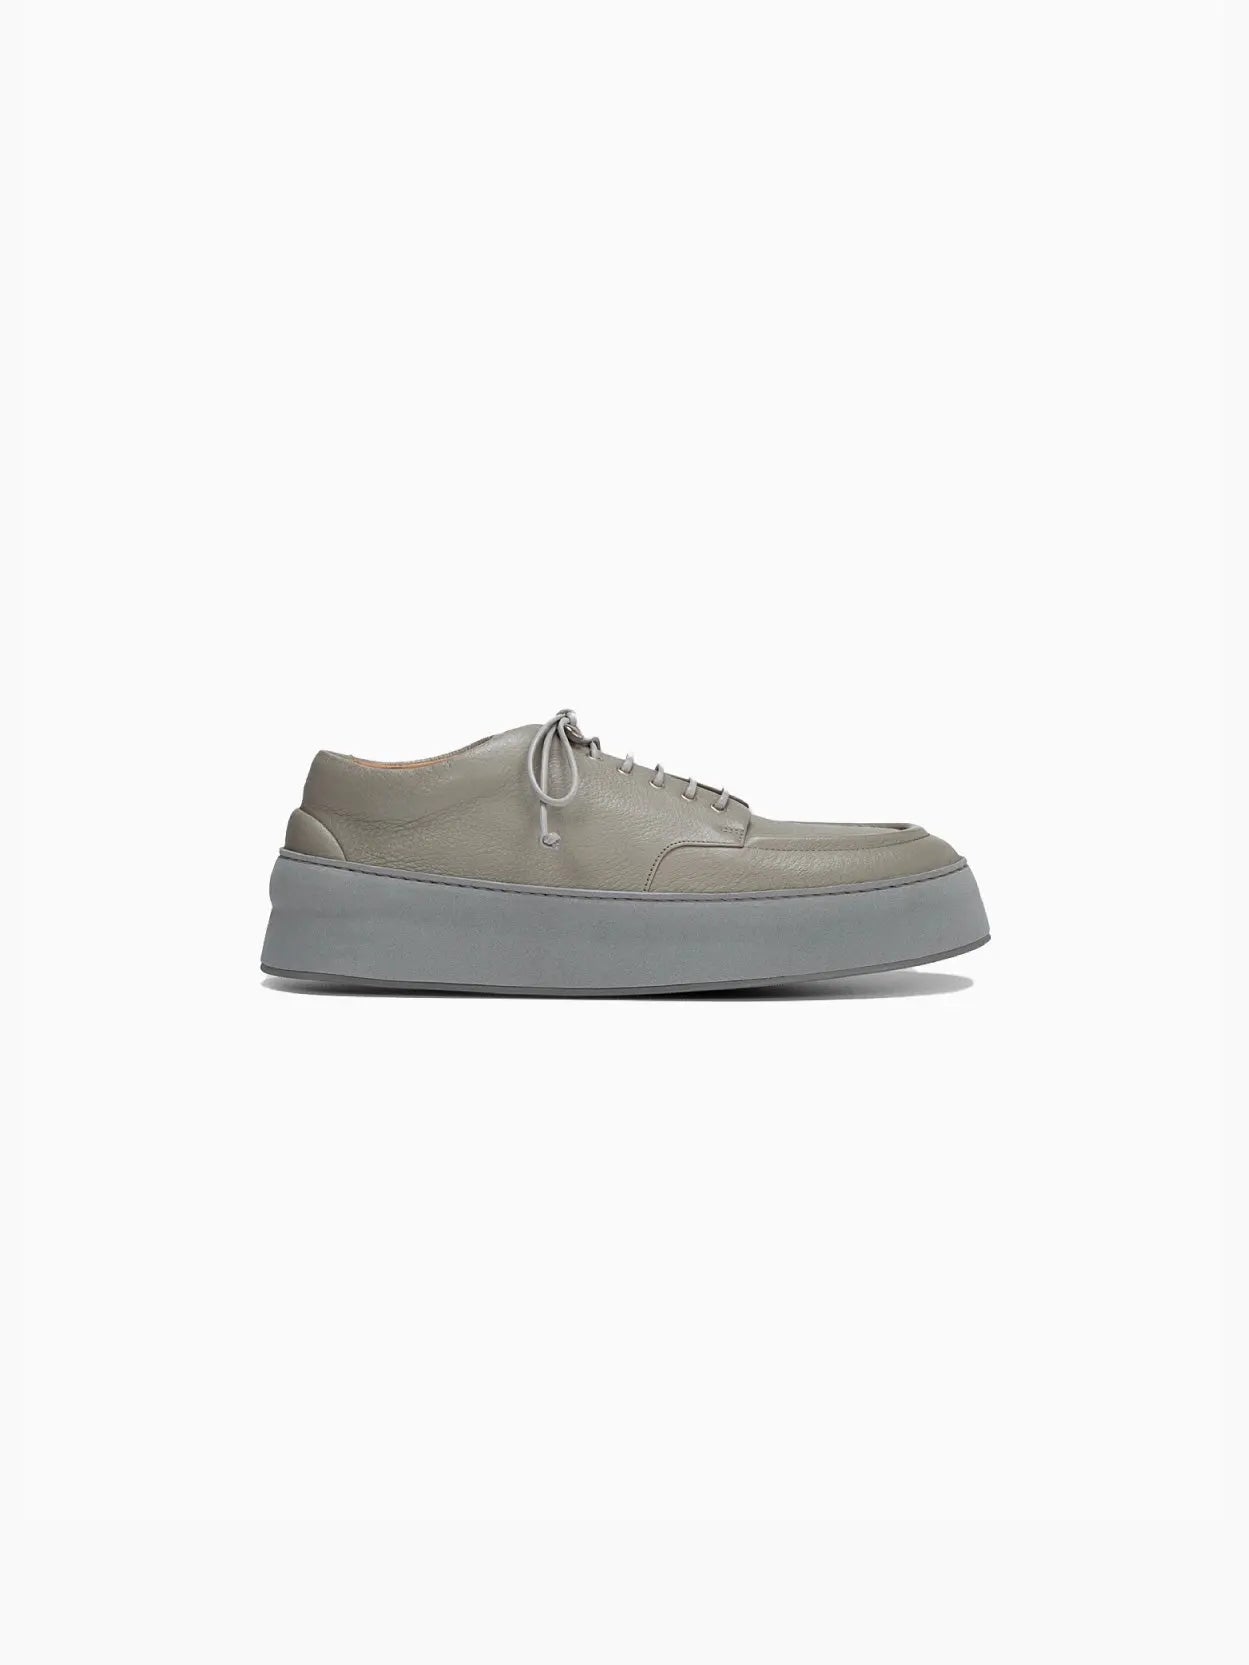 A single beige Cassapana Derby Asphalt sneaker by Marsèll with a thick, gray sole is shown against a plain white background. The shoe, available at Bassalstore in Barcelona, features a lace-up design with matching beige laces and a minimalist, modern silhouette.